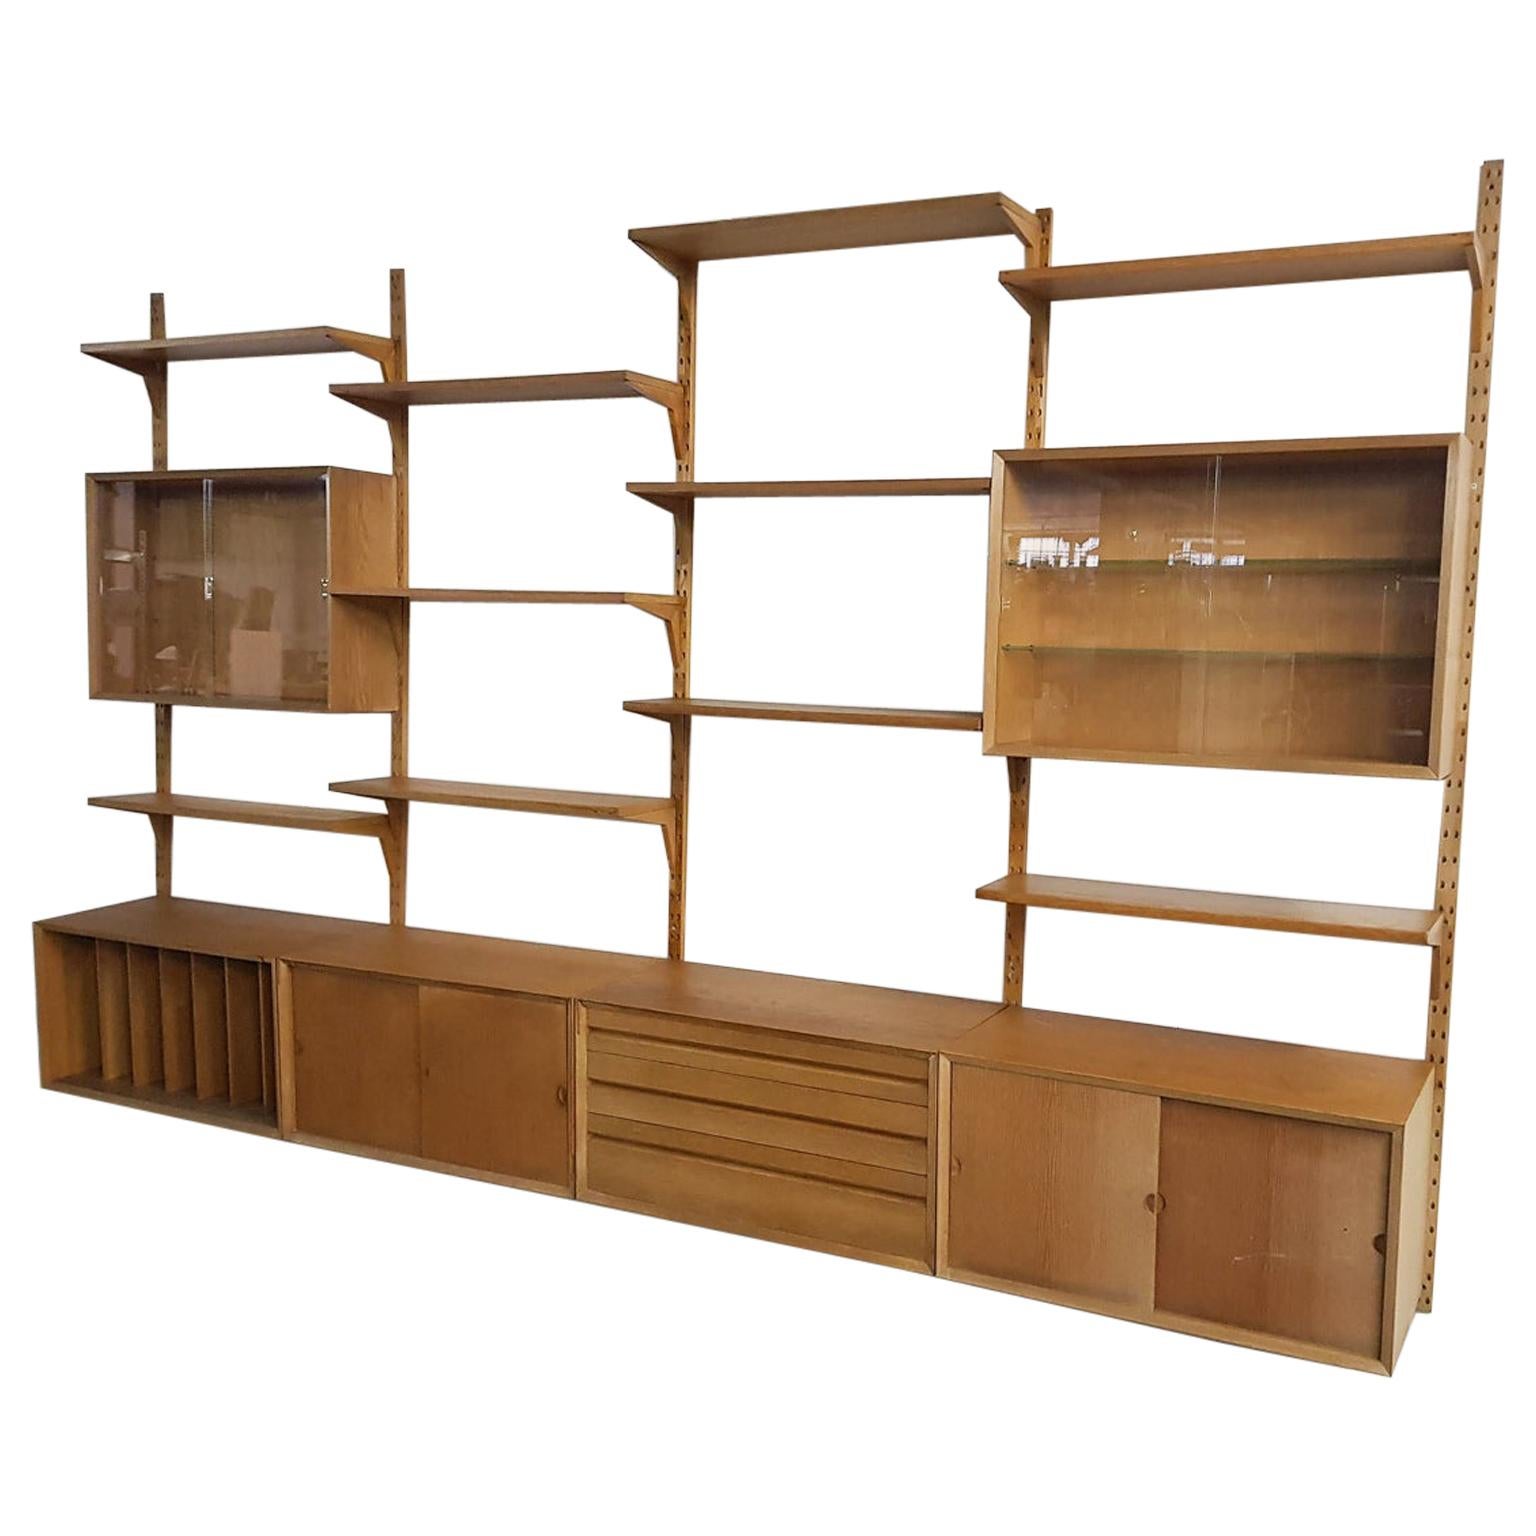 Large Oak Wall or Shelving Unit by Poul Cadovius for Cado, Danish Modern, 1964